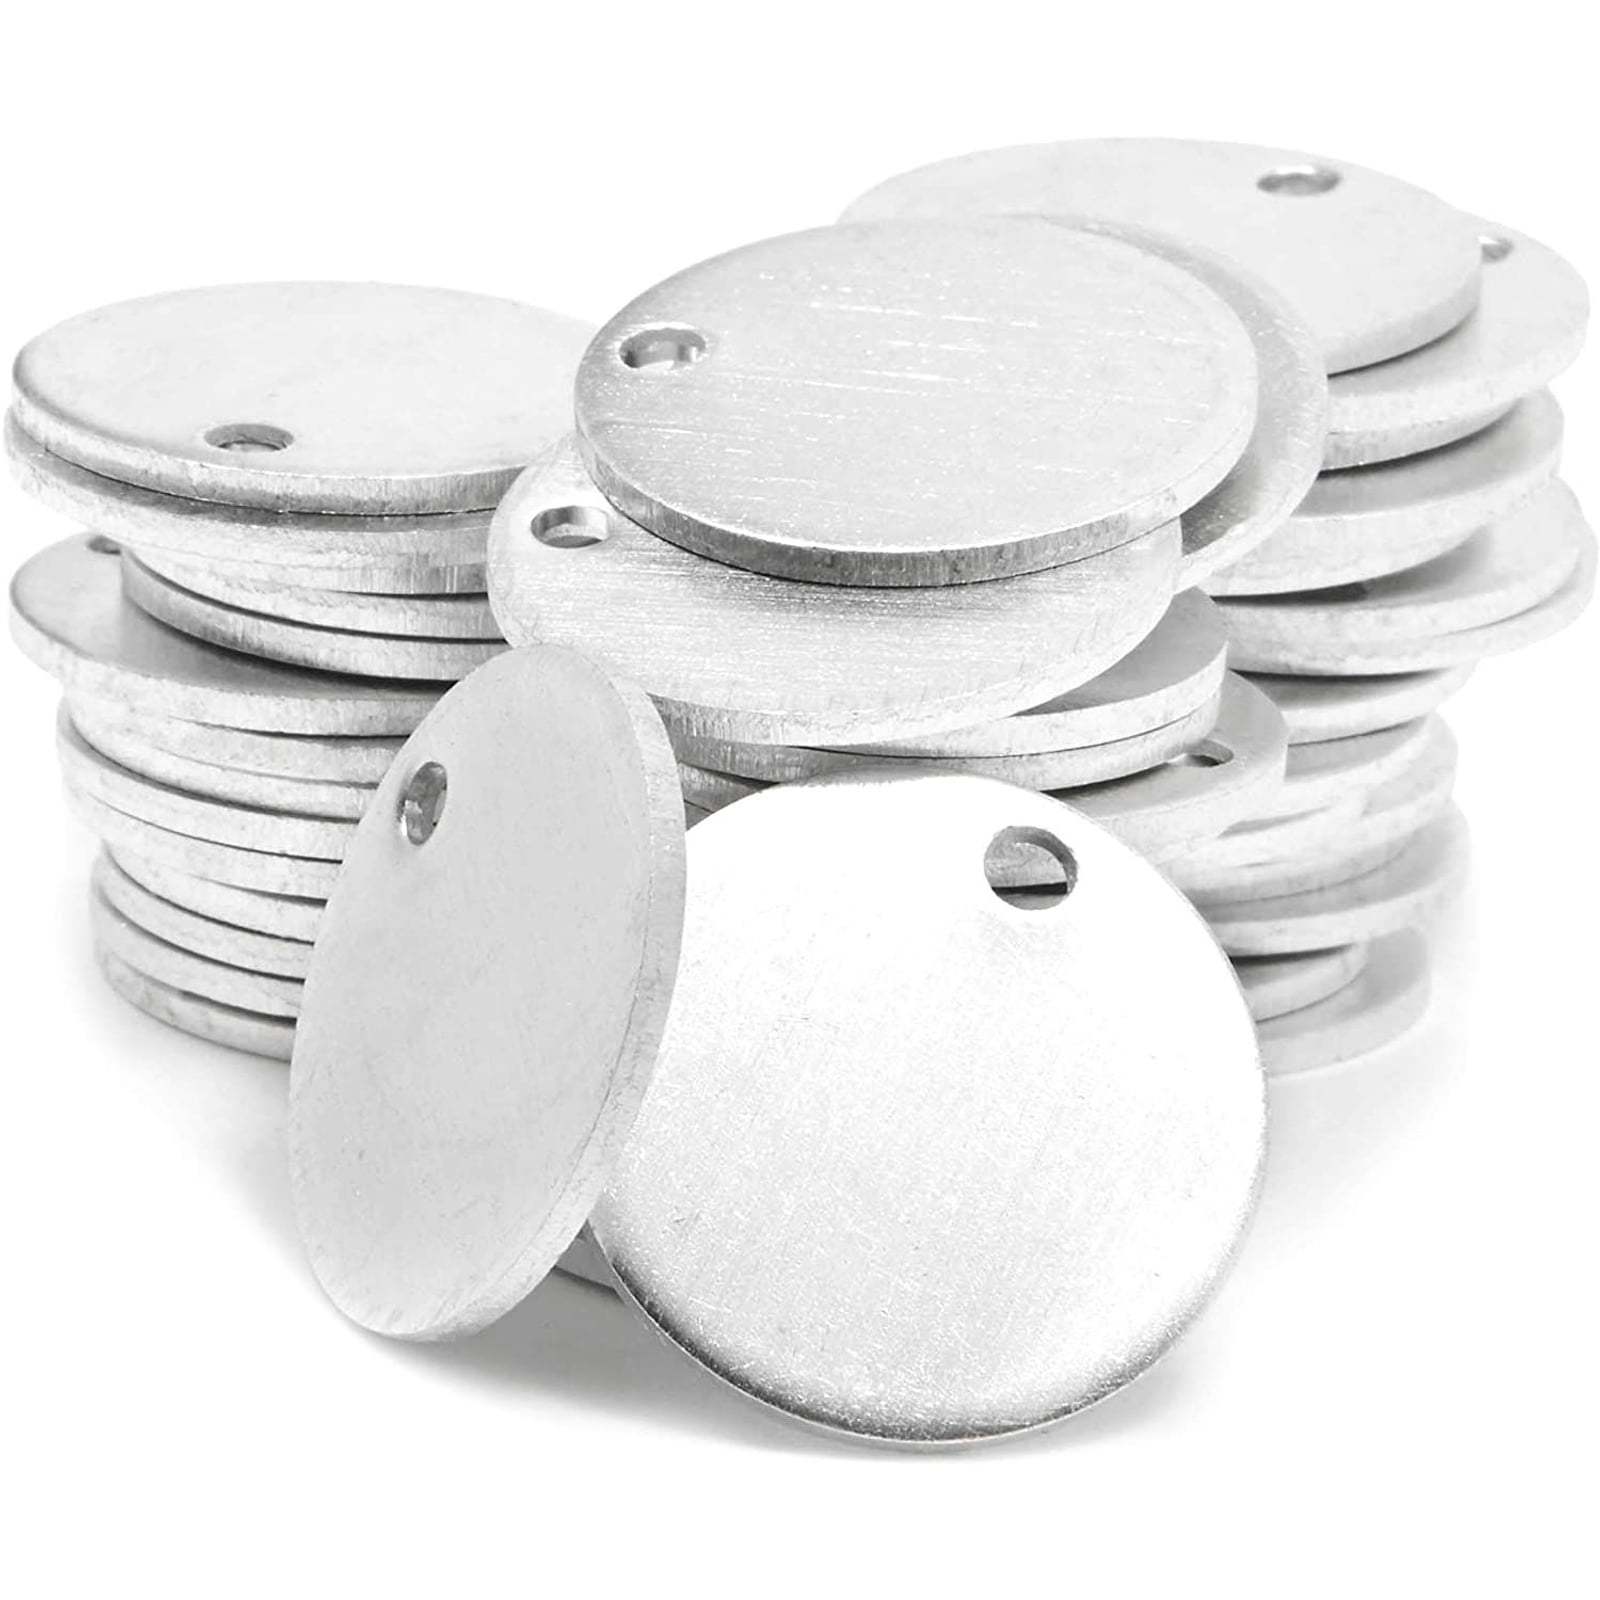 Sterling Discs ALL SIZES Sterling Silver Discs Hand Stamping Blanks Metal Jewelry Making Supplies Round Disks Circles CHOOSE Inch mm Gauge